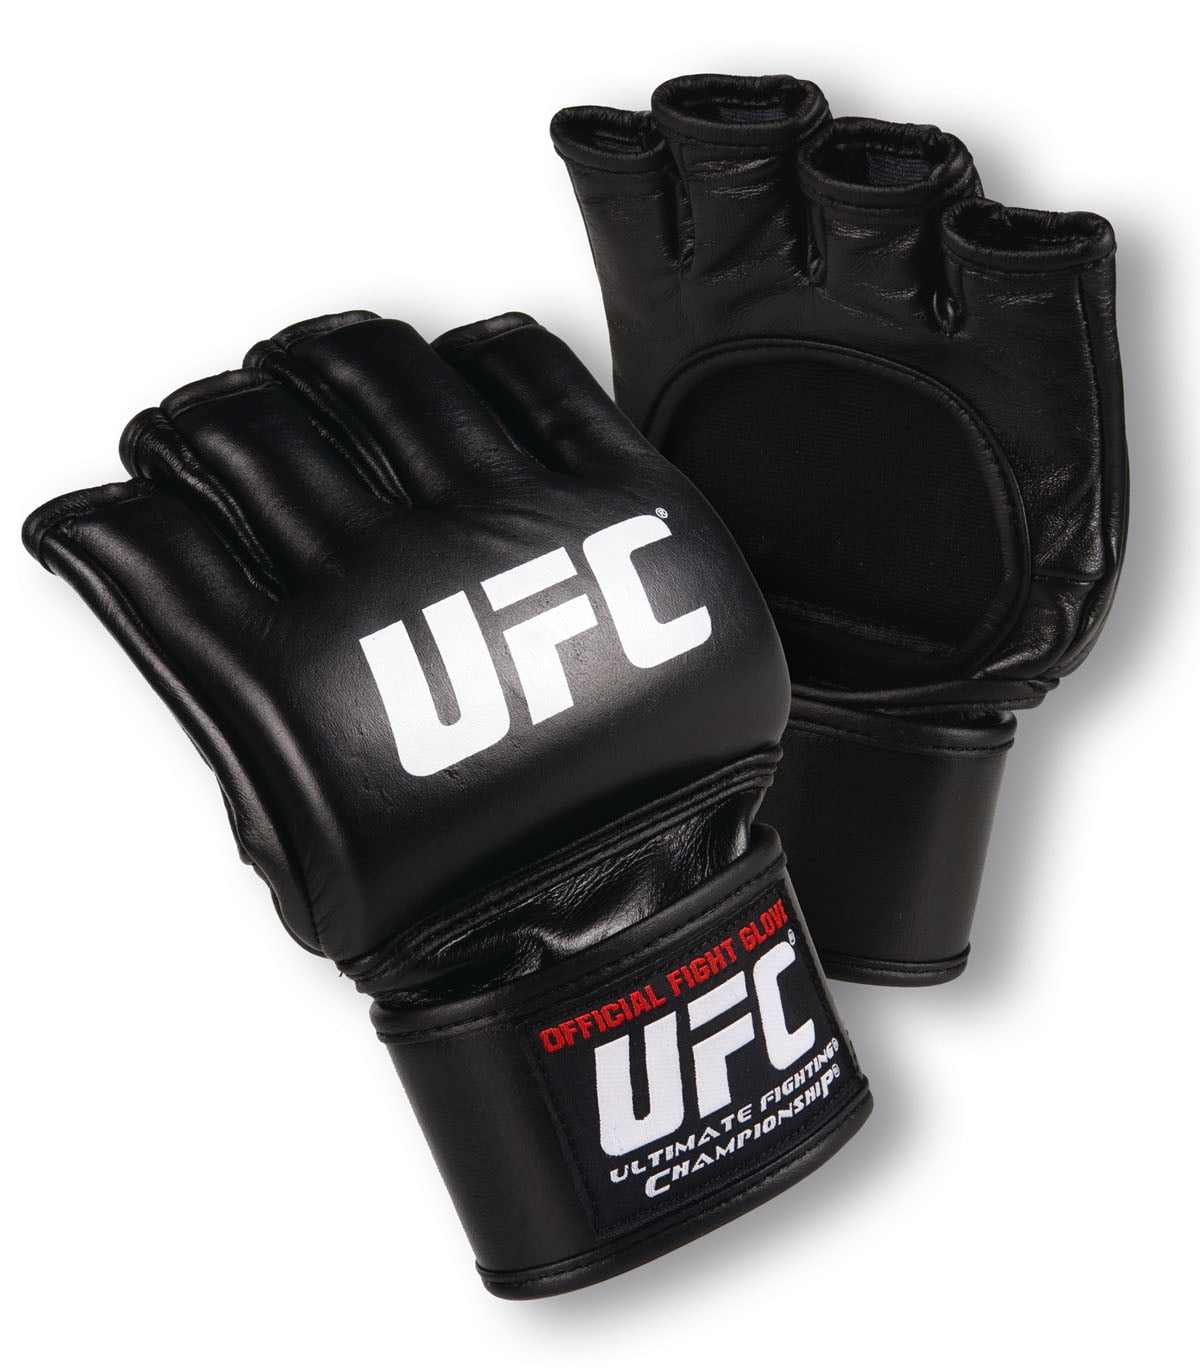 UFC Official Fight Glove - Black - In Pairs